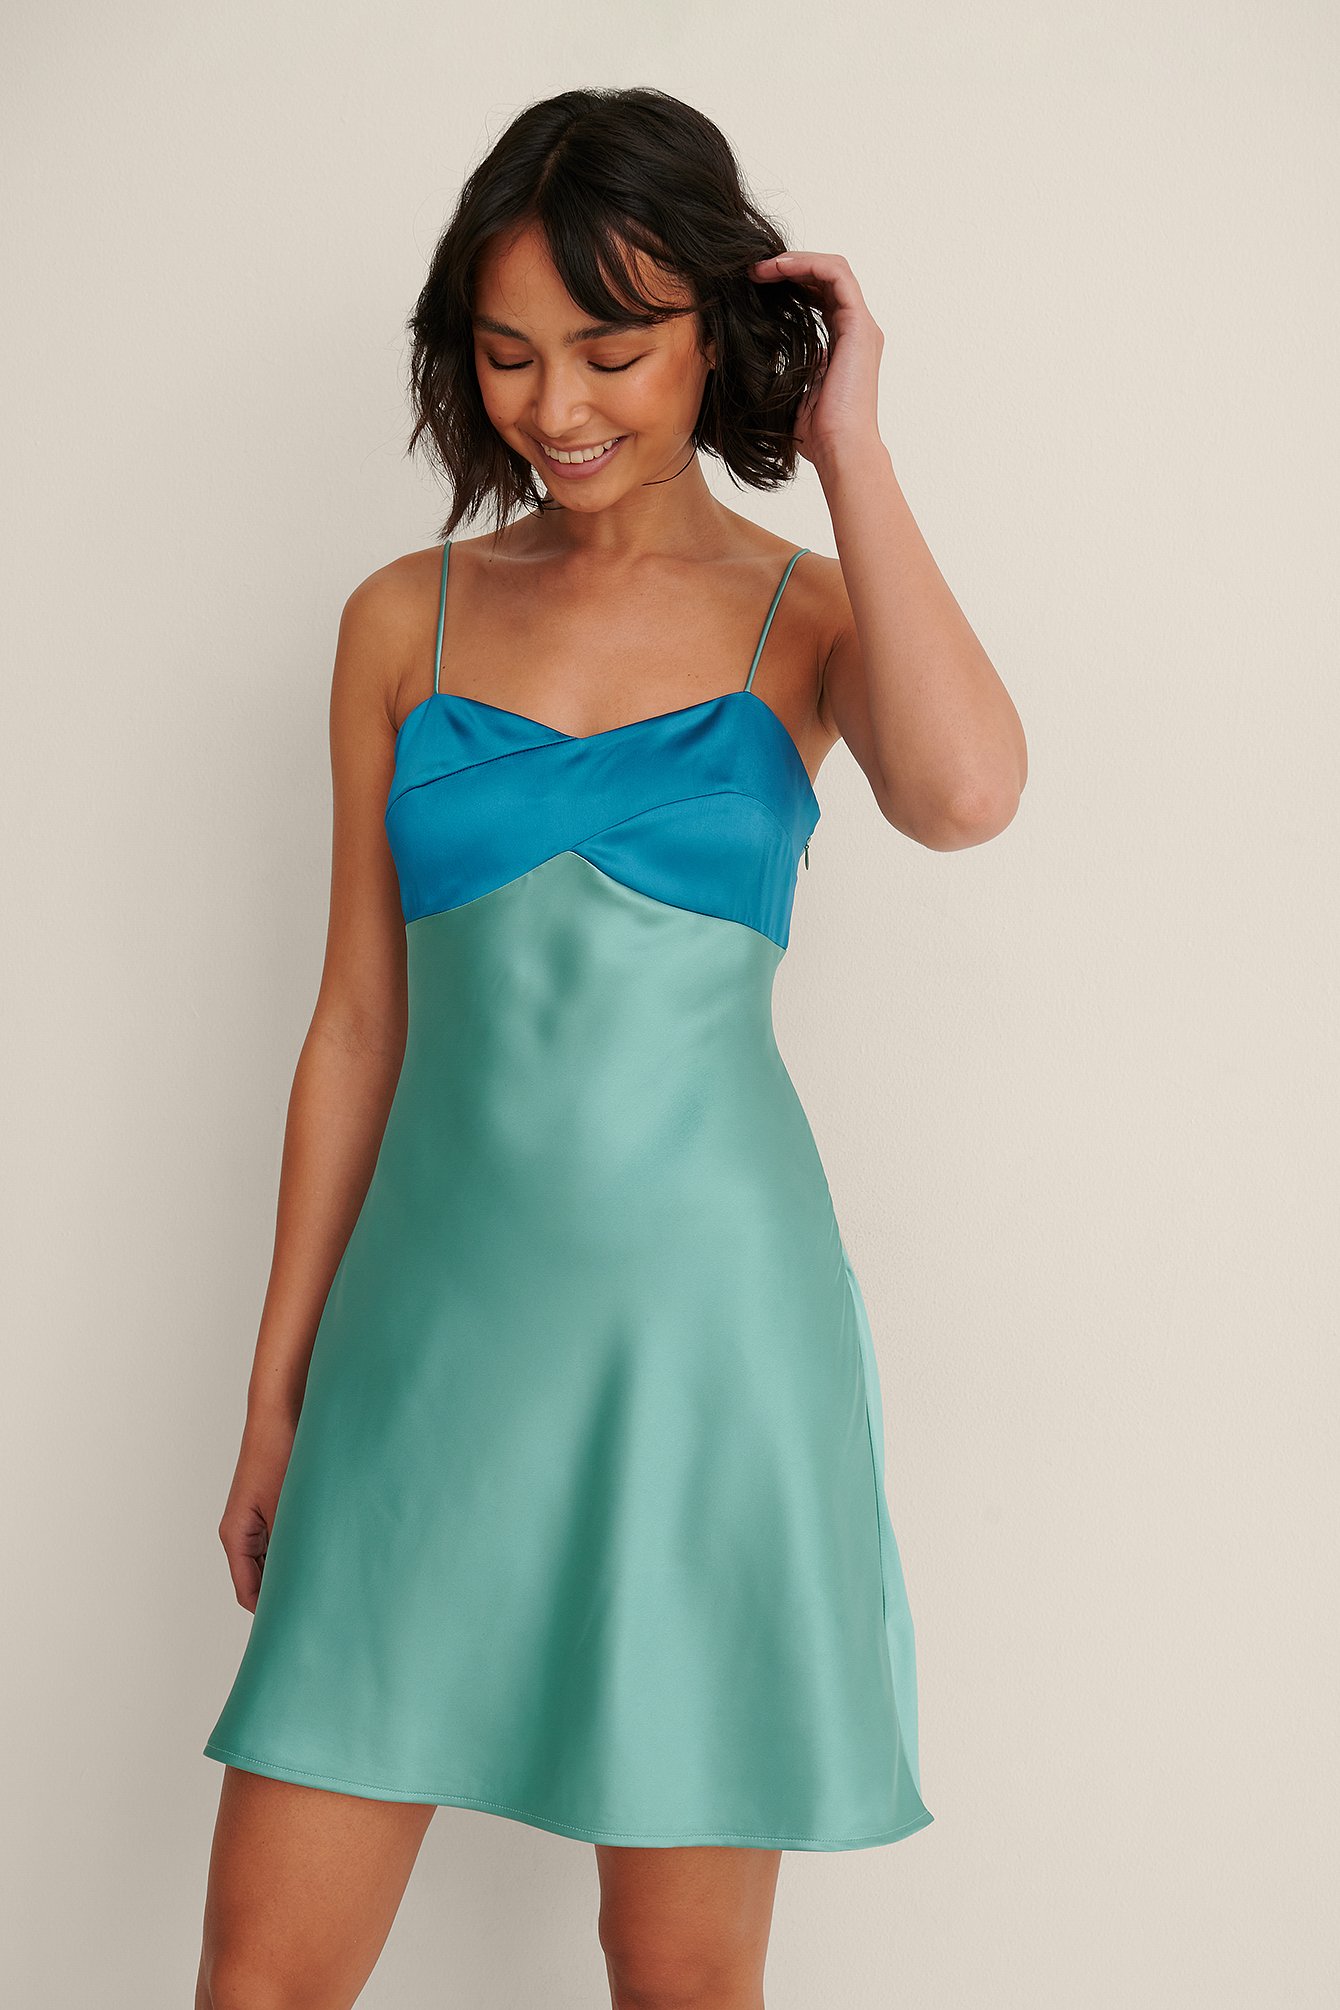 Teal Recycled Colorblock Mini Dress